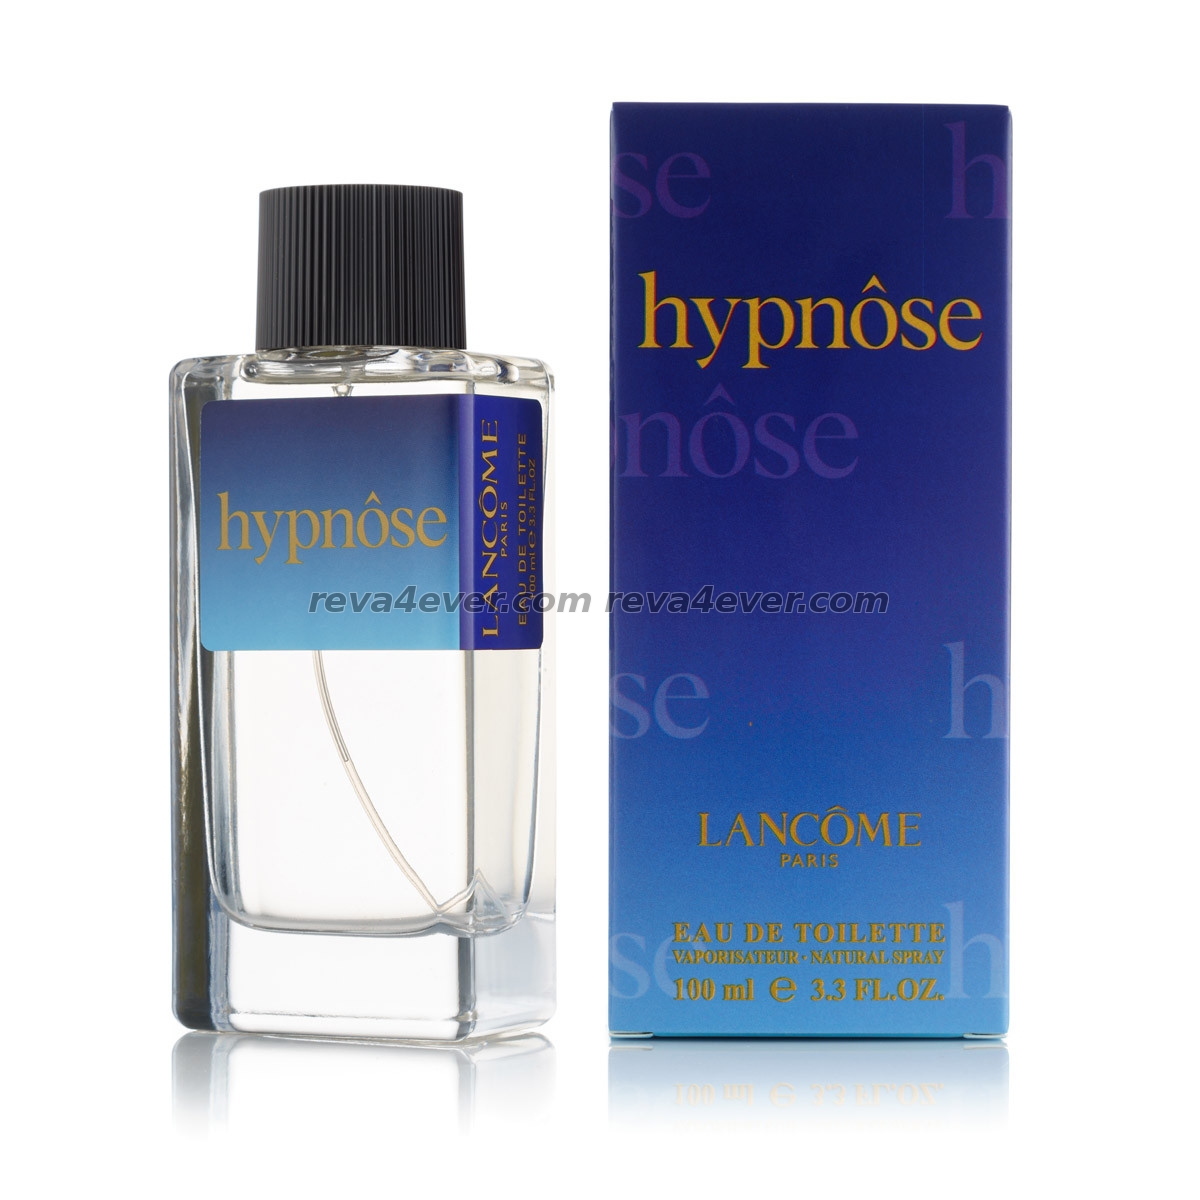 Lancome Hypnose edt 100ml Imperatrice style